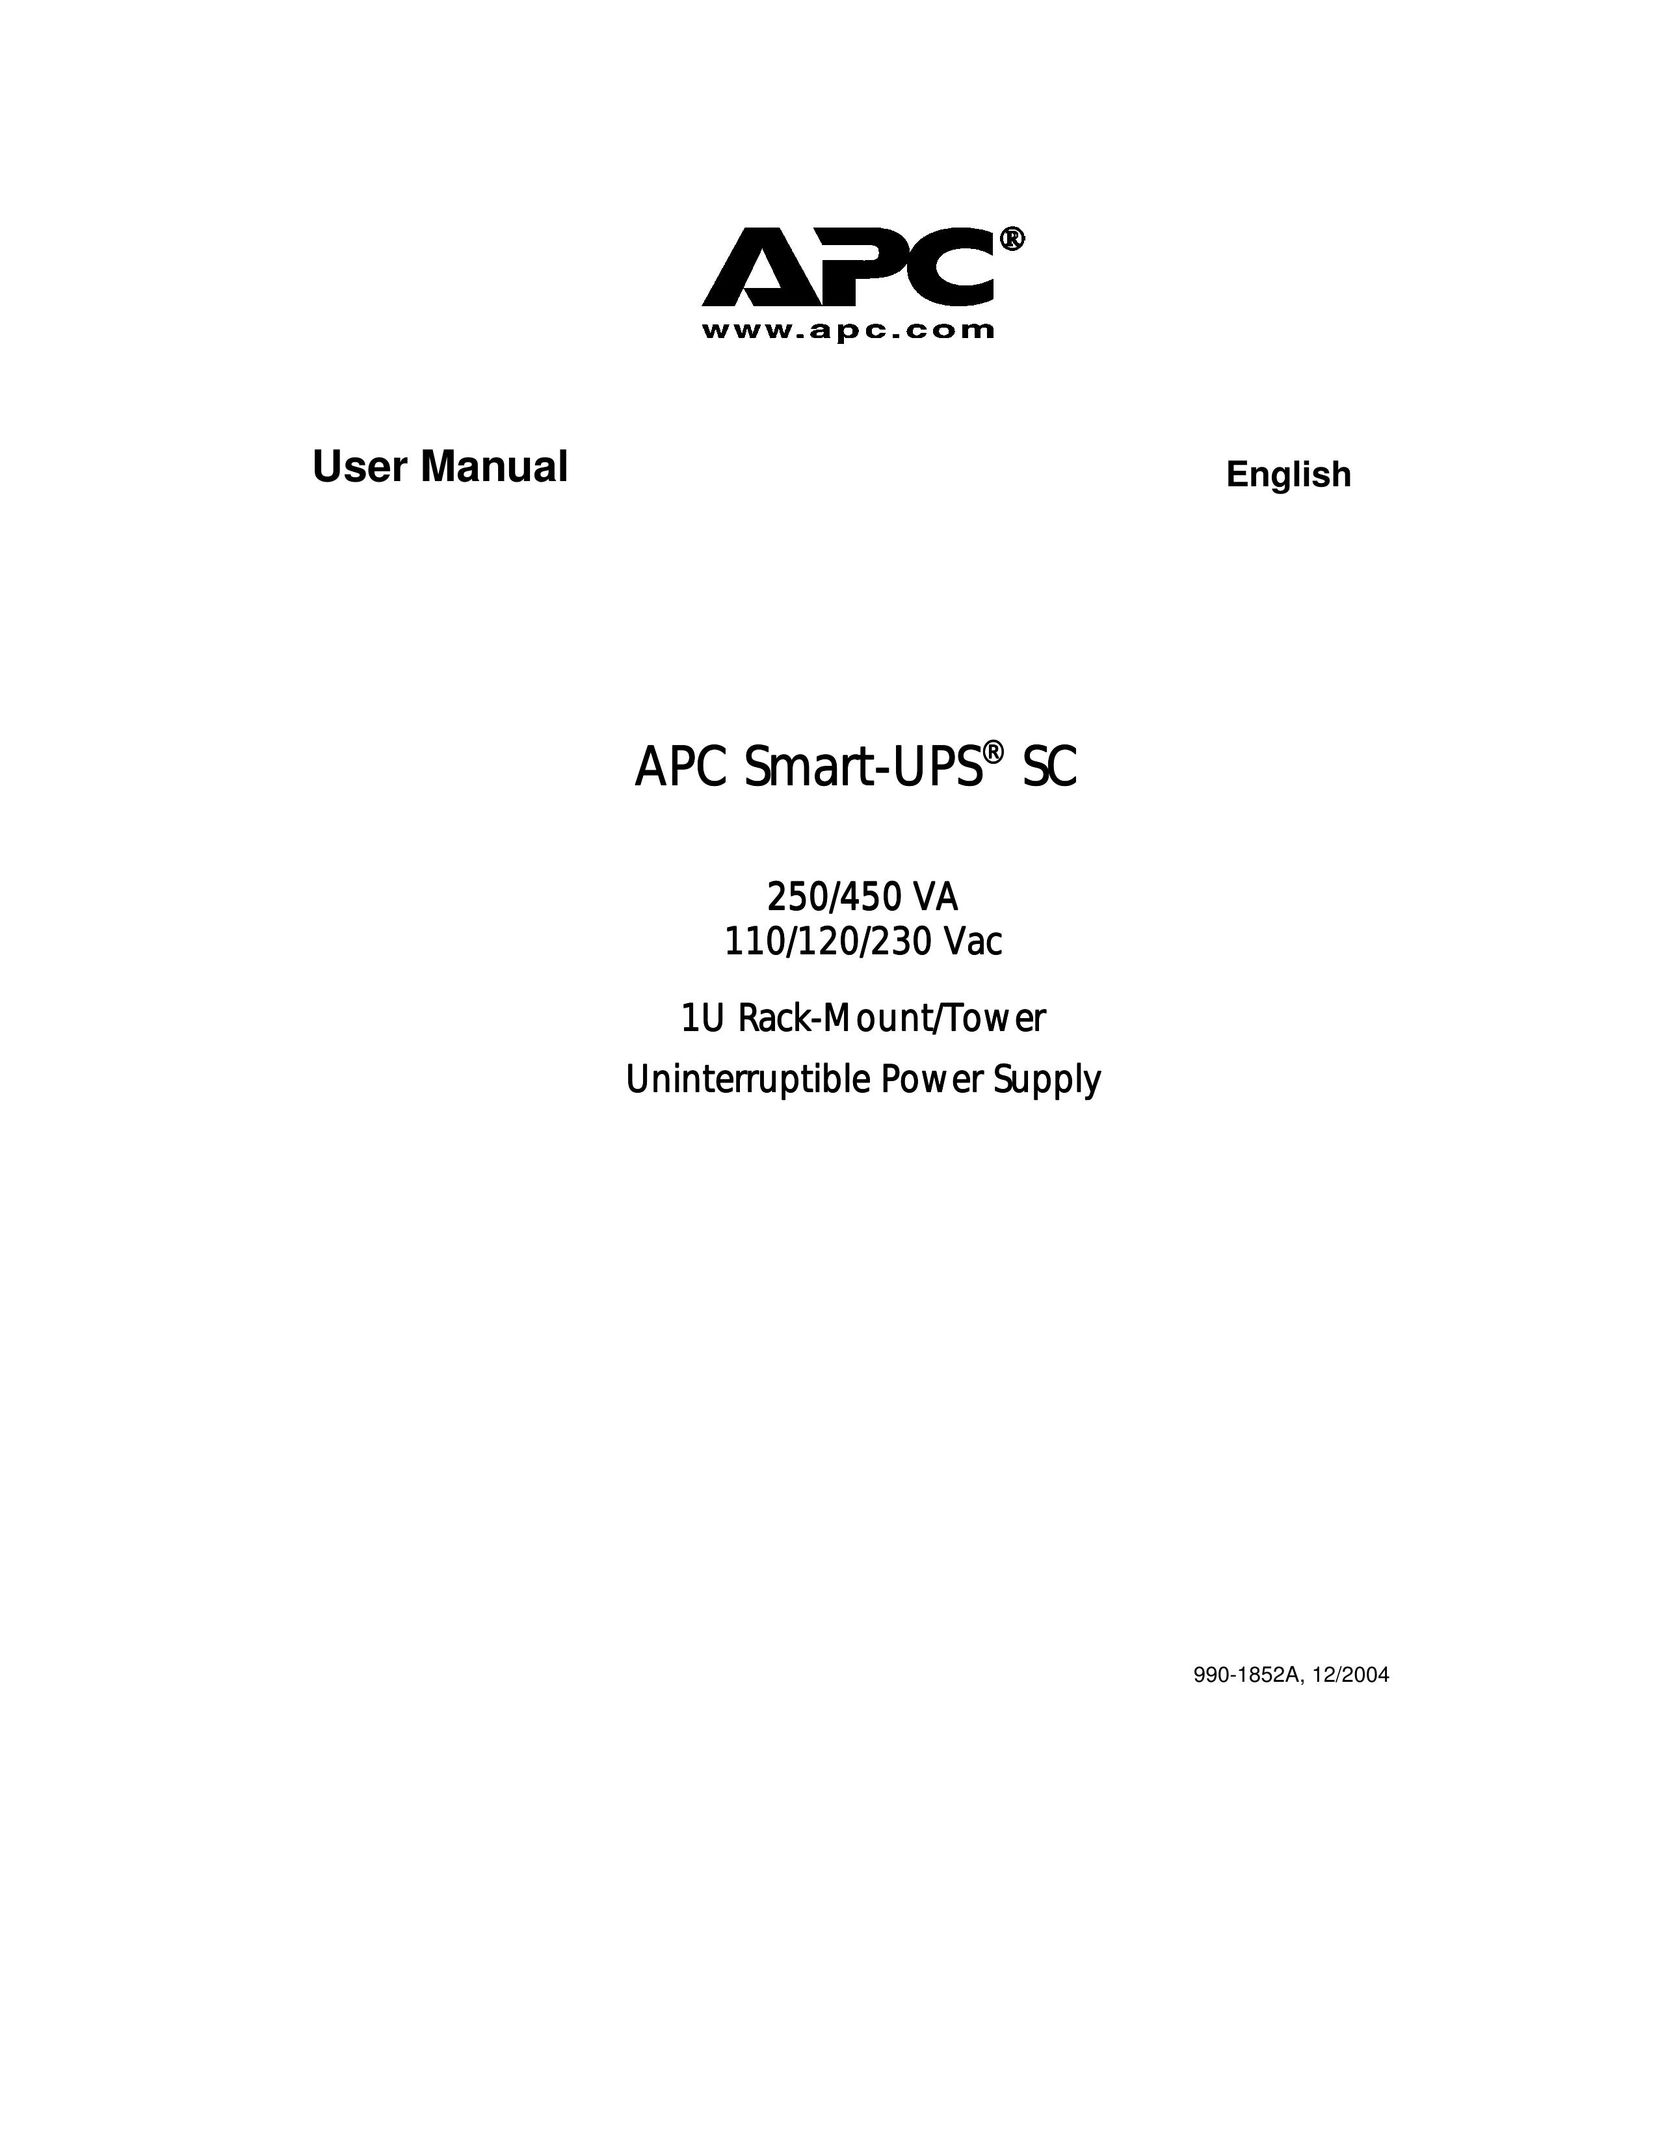 American Power Conversion 110, 120, 230 Power Supply User Manual